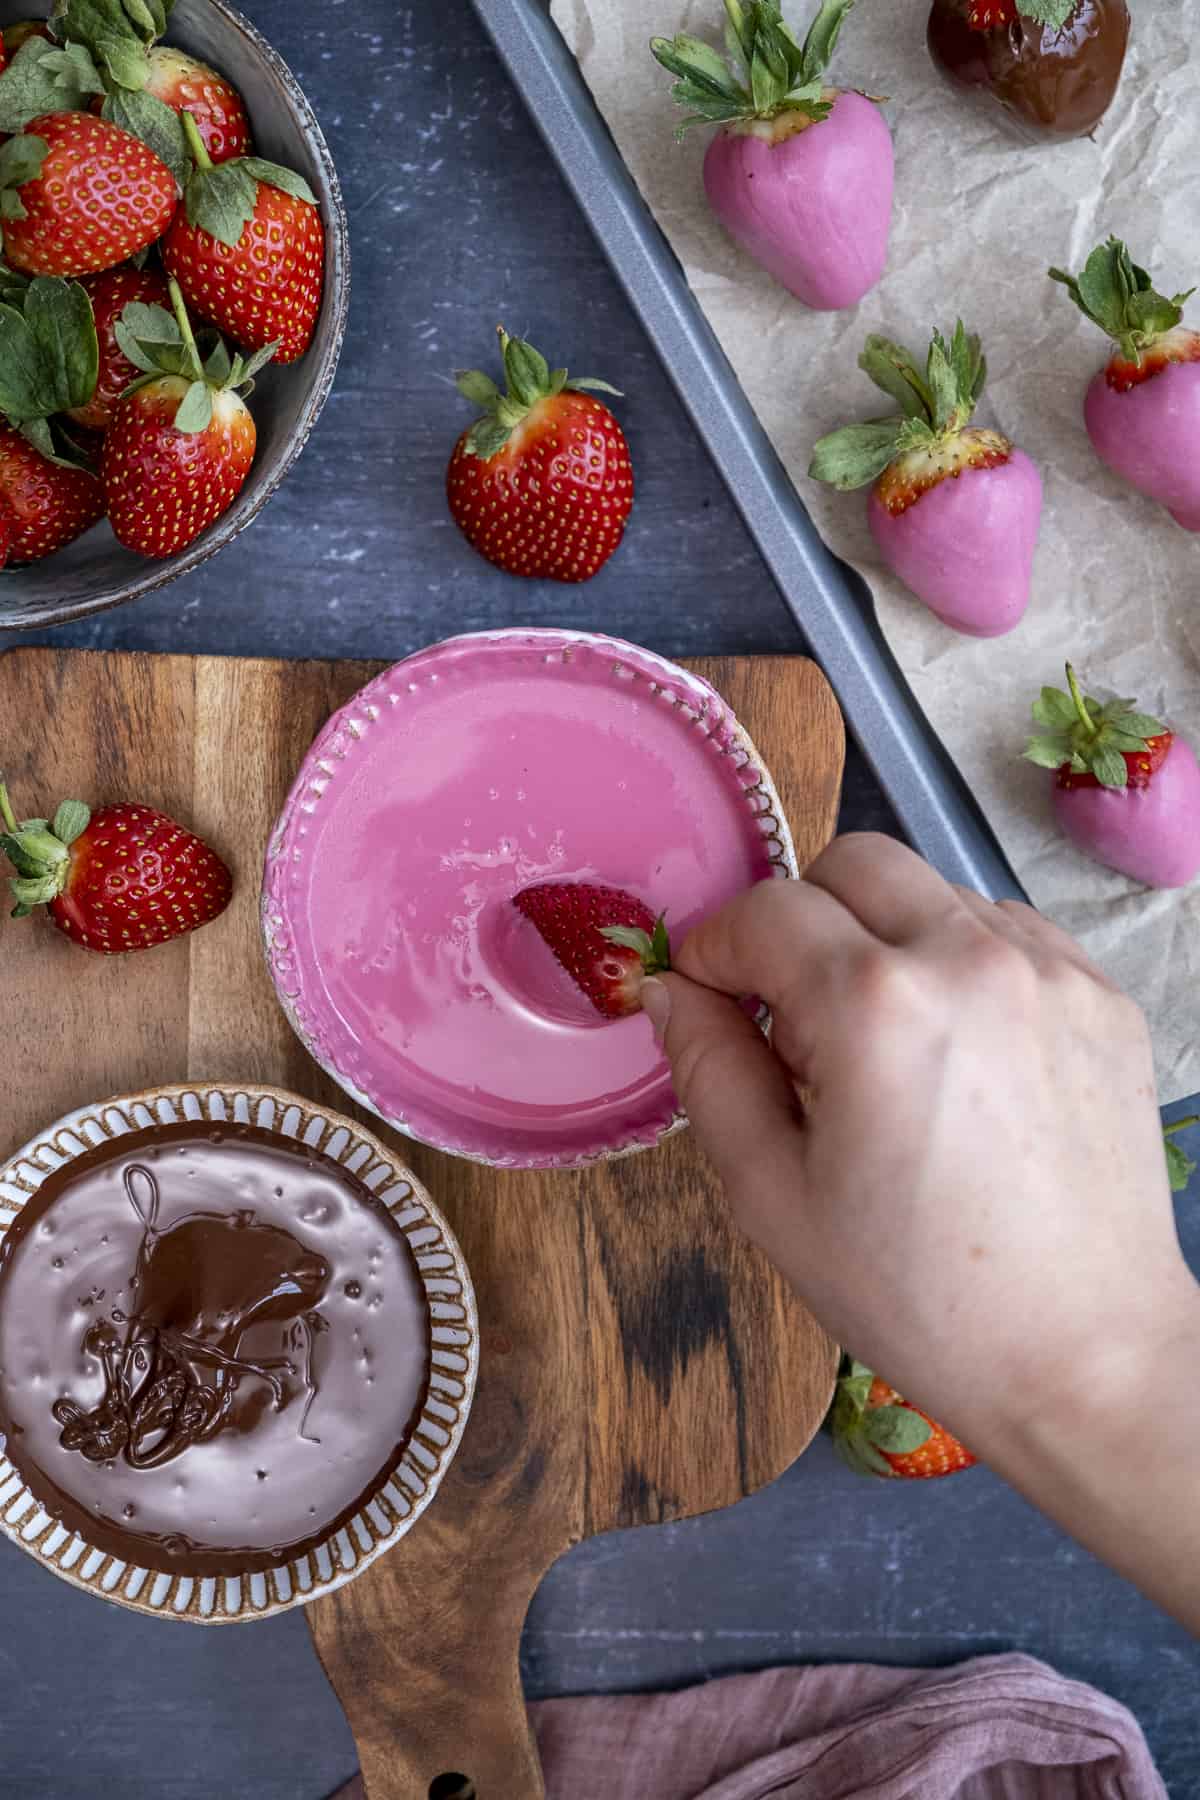 A hand dipping a strawberry into melted pink chocolate in a small white bowl, melted dark chocolate and strawberries on the side.